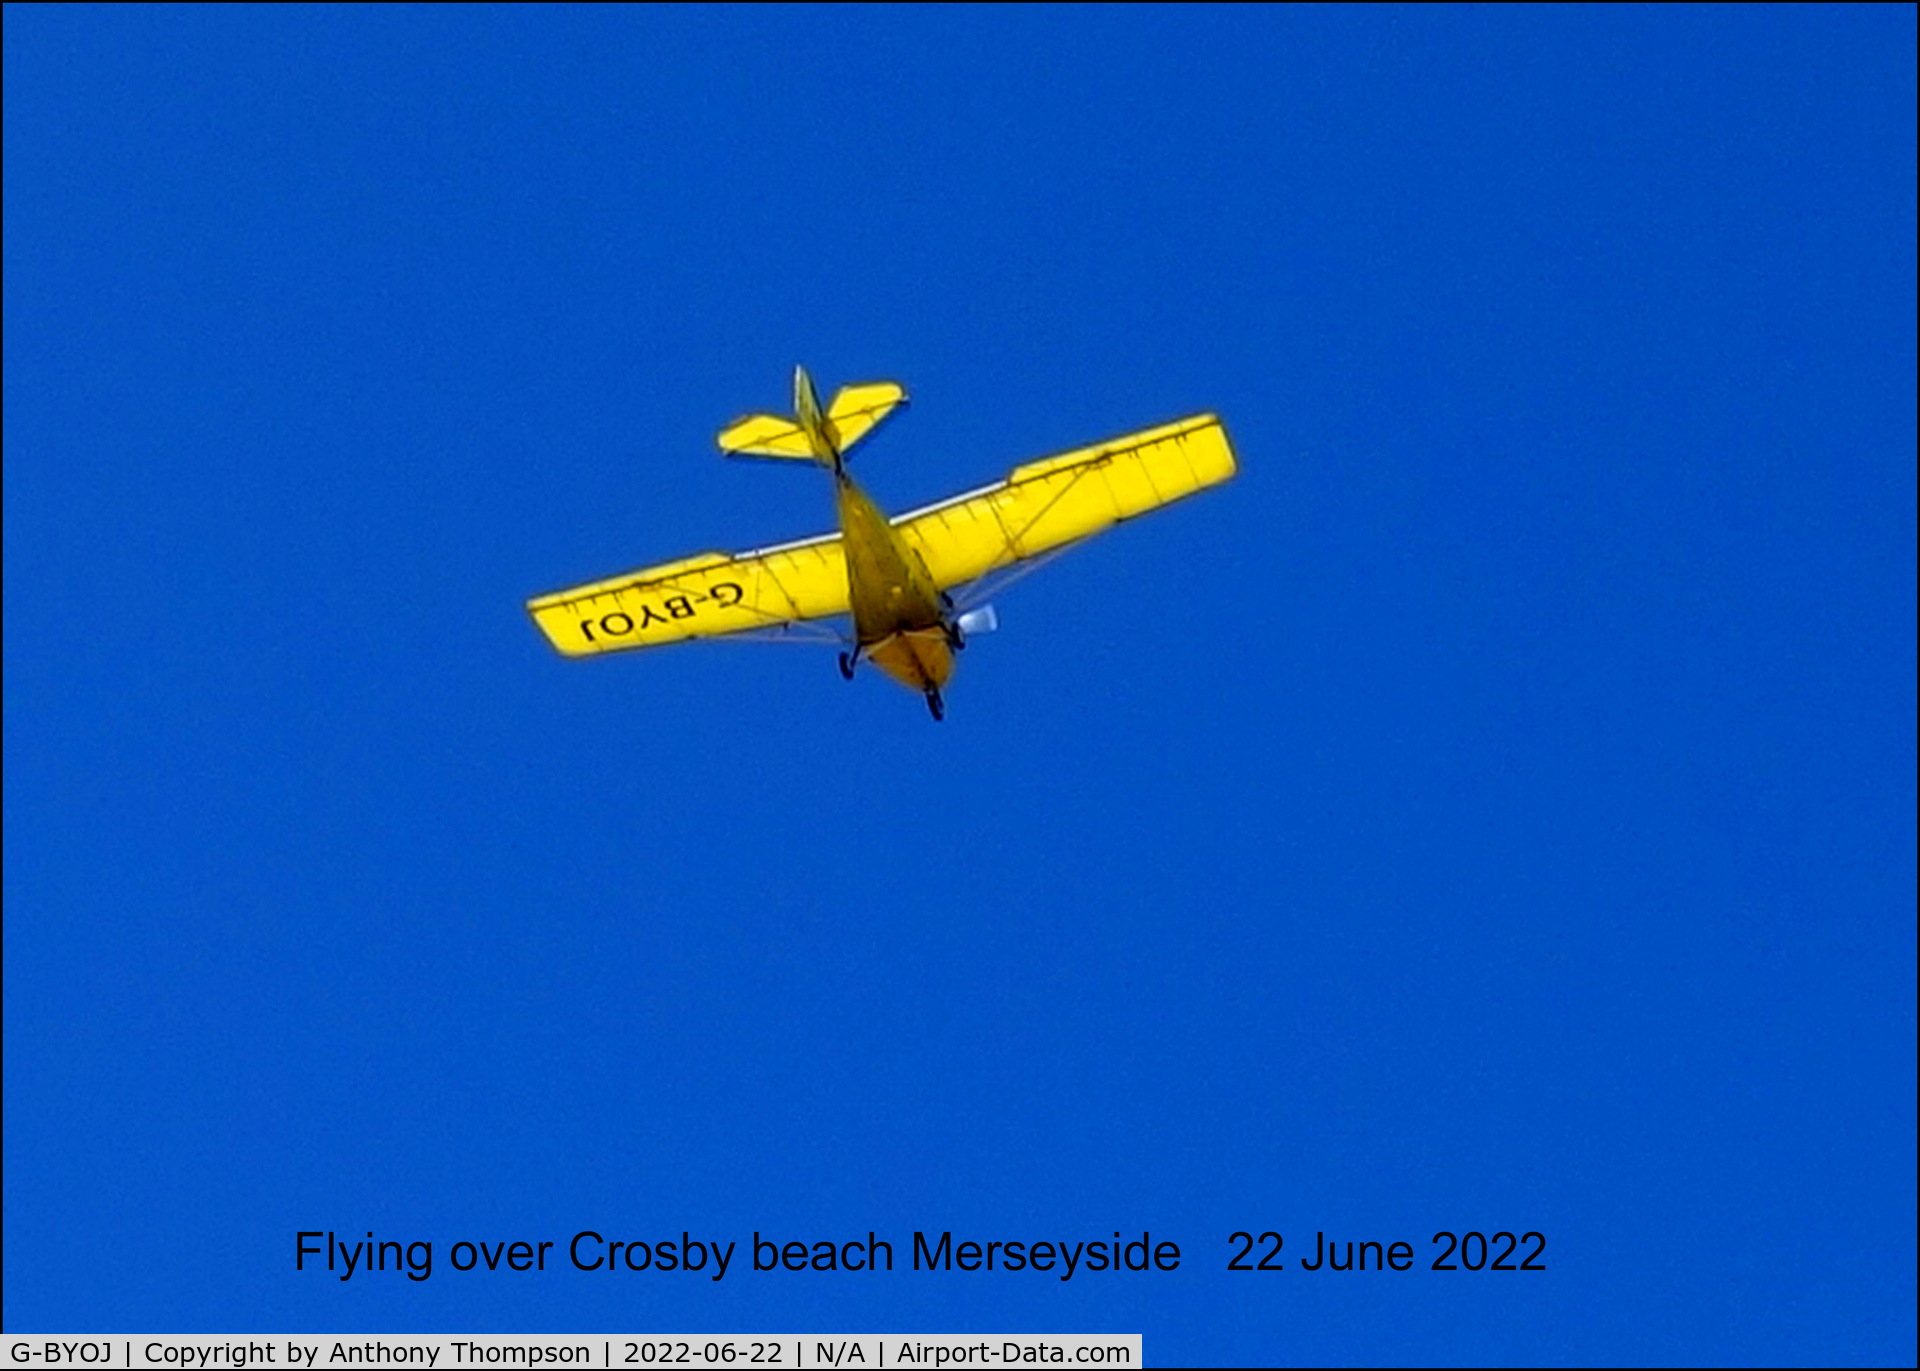 G-BYOJ, 2000 Raj Hamsa X-Air 582(1) C/N BMAA/HB/108, This photo was taken on 22 June 2022 of the aircraft flying over Crosby beach Merseyside. It was good to see it on a perfect day for flying.
There are no constraints on the use of my photo taken with a Sony RX100 camera